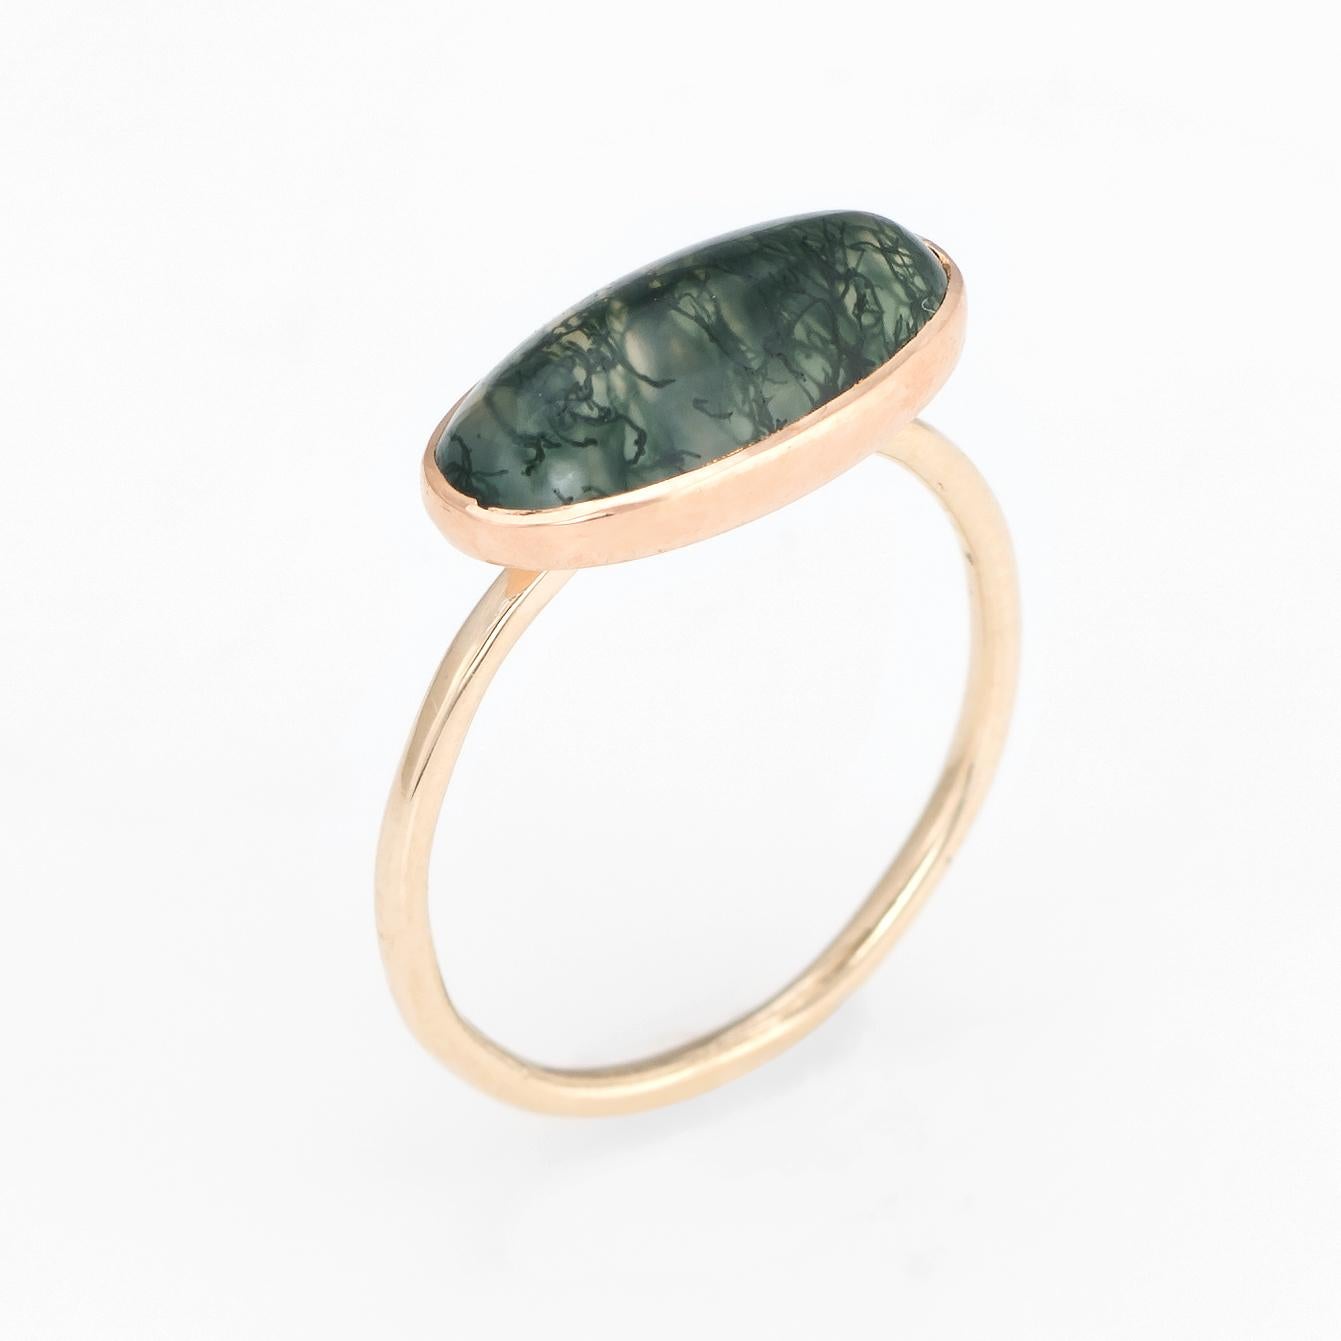 Originally an antique Victorian era stick pin (circa 1880s to 1900s), the moss agate ring is crafted in 14 karat yellow gold.

The ring is mounted with the original stick pin. Our jeweler rounded the stick pin into a slim band for the finger. The